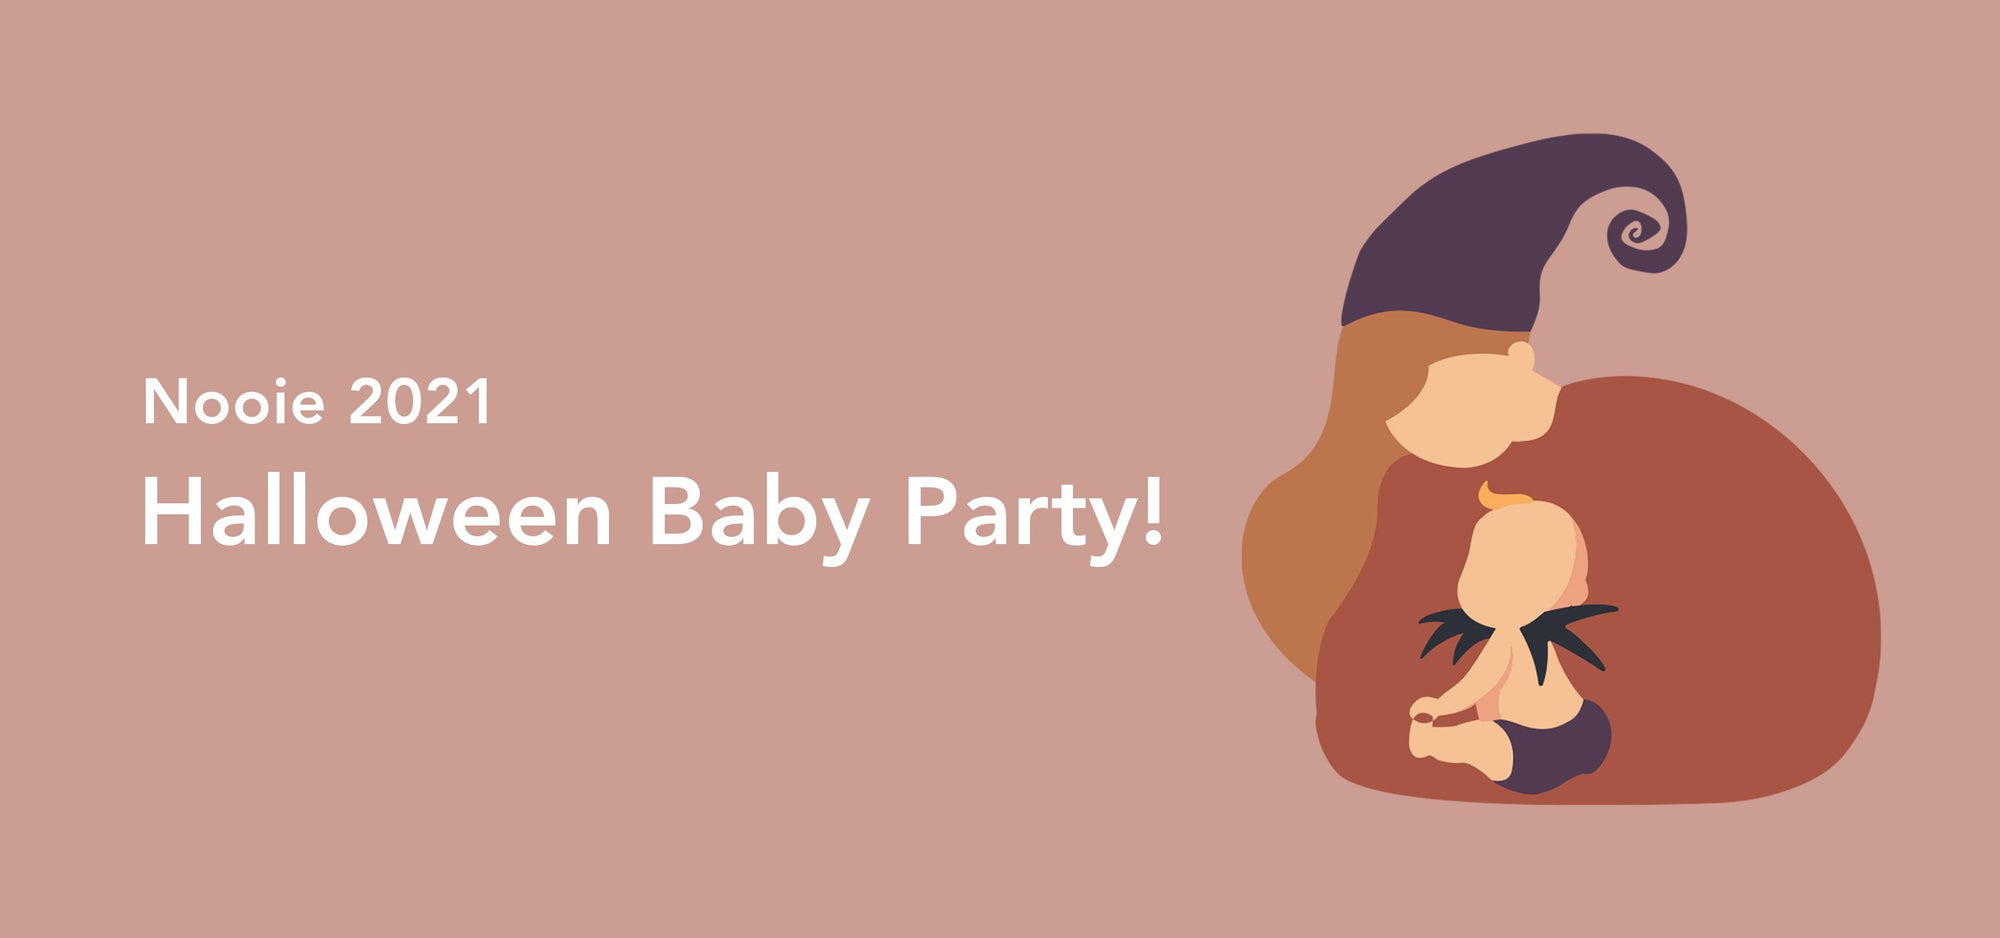 Nooie Halloween Baby Party 2021: How to Enter